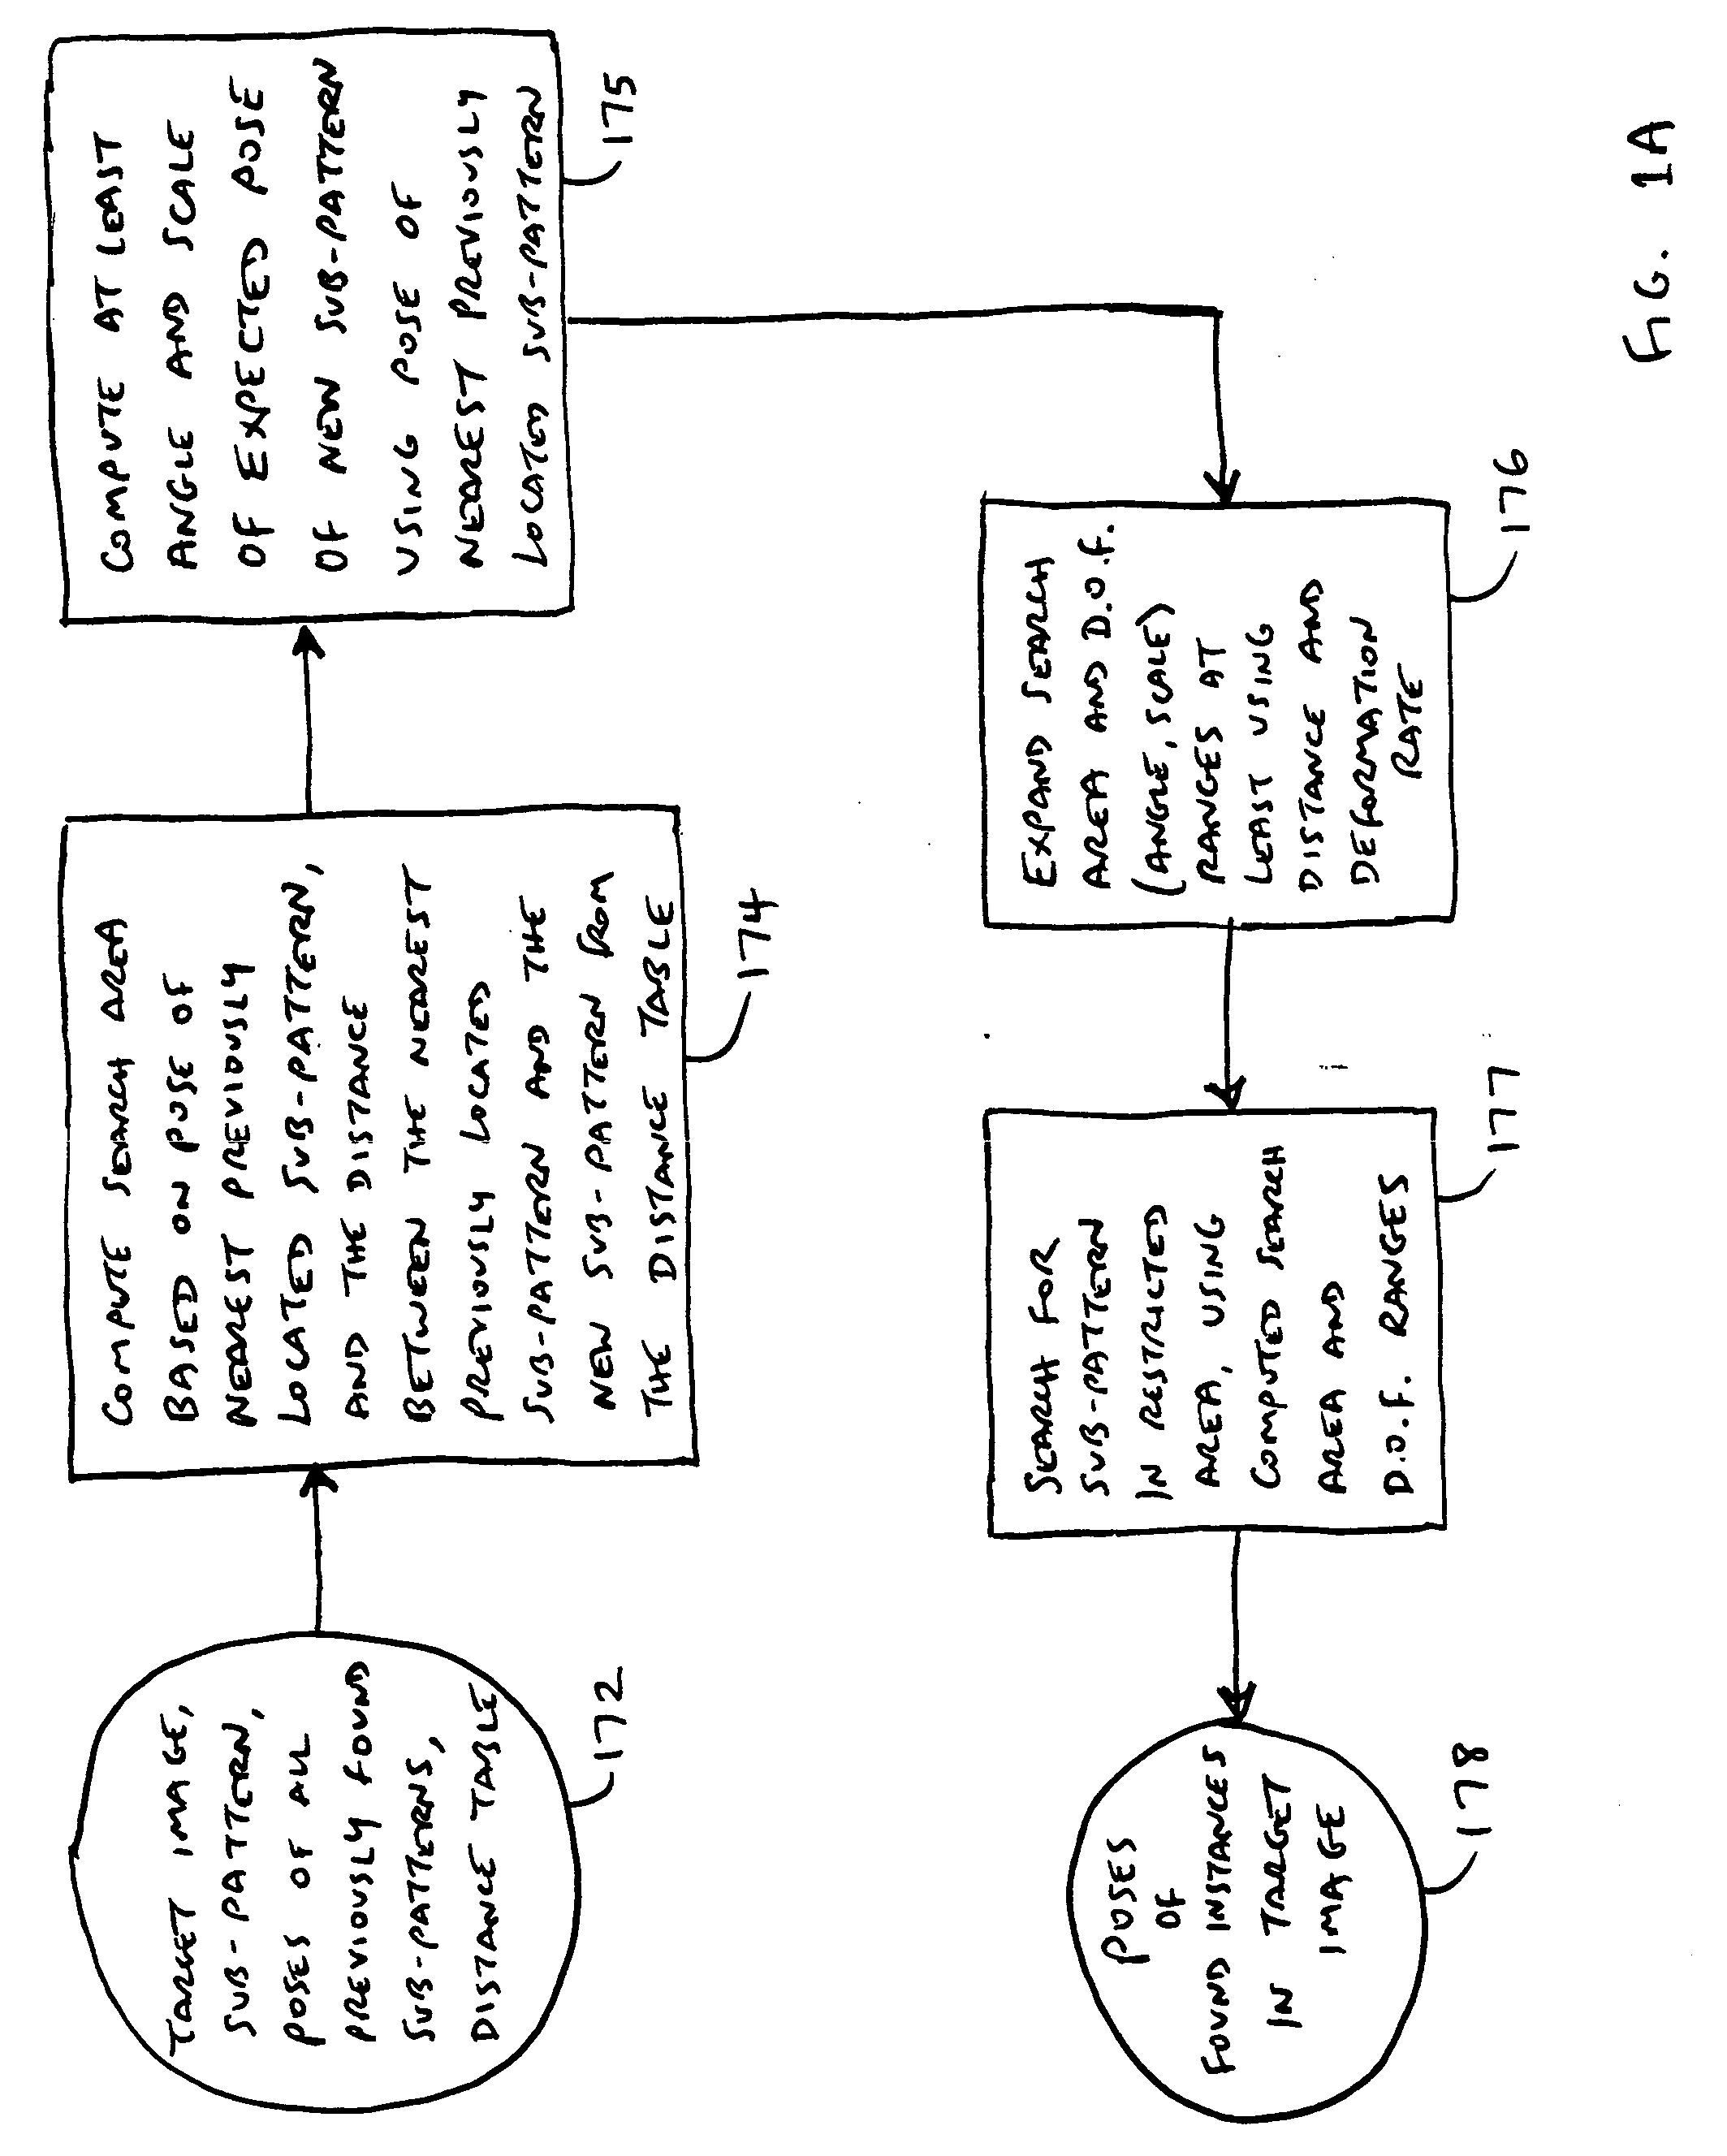 Methods for finding and characterizing a deformed pattern in an image